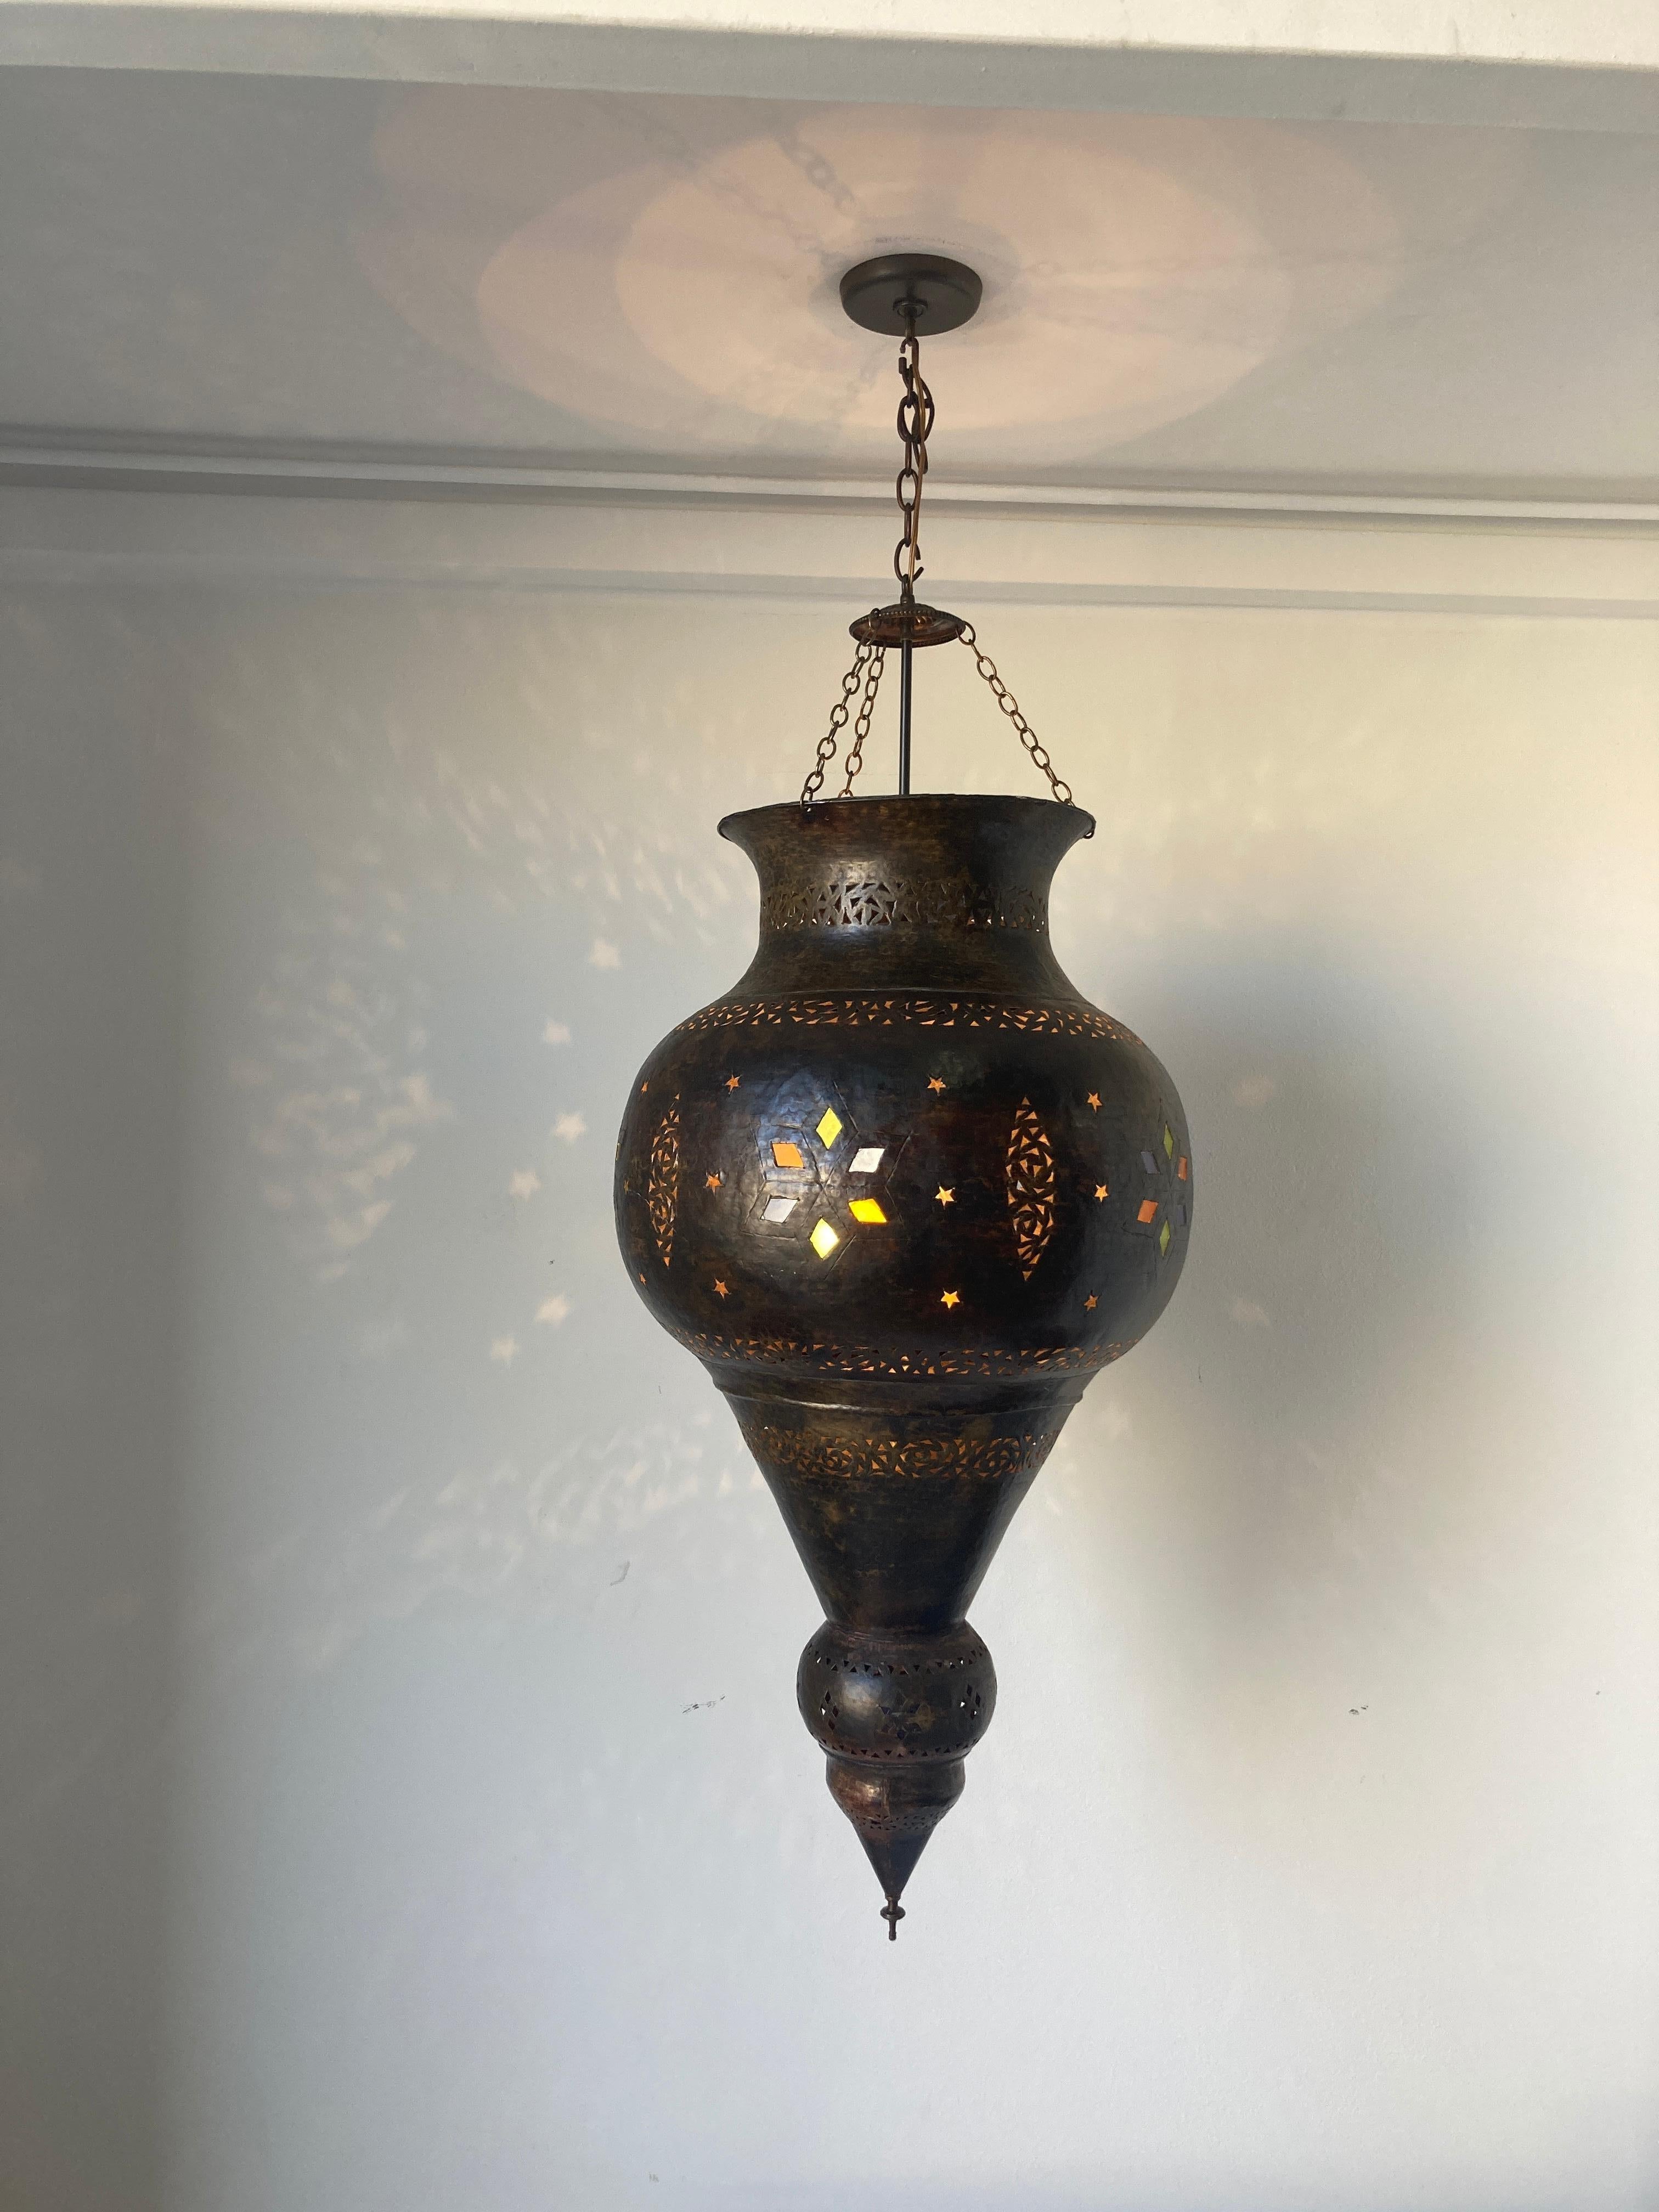 Vintage Moroccan large bronze patinated pendant.
This large Moorish bronze chandelier is delicately hand-crafted and hand-hammered with openwork design with small jeweled colored glass.
Rewired ready to install, comes with matching color ceiling